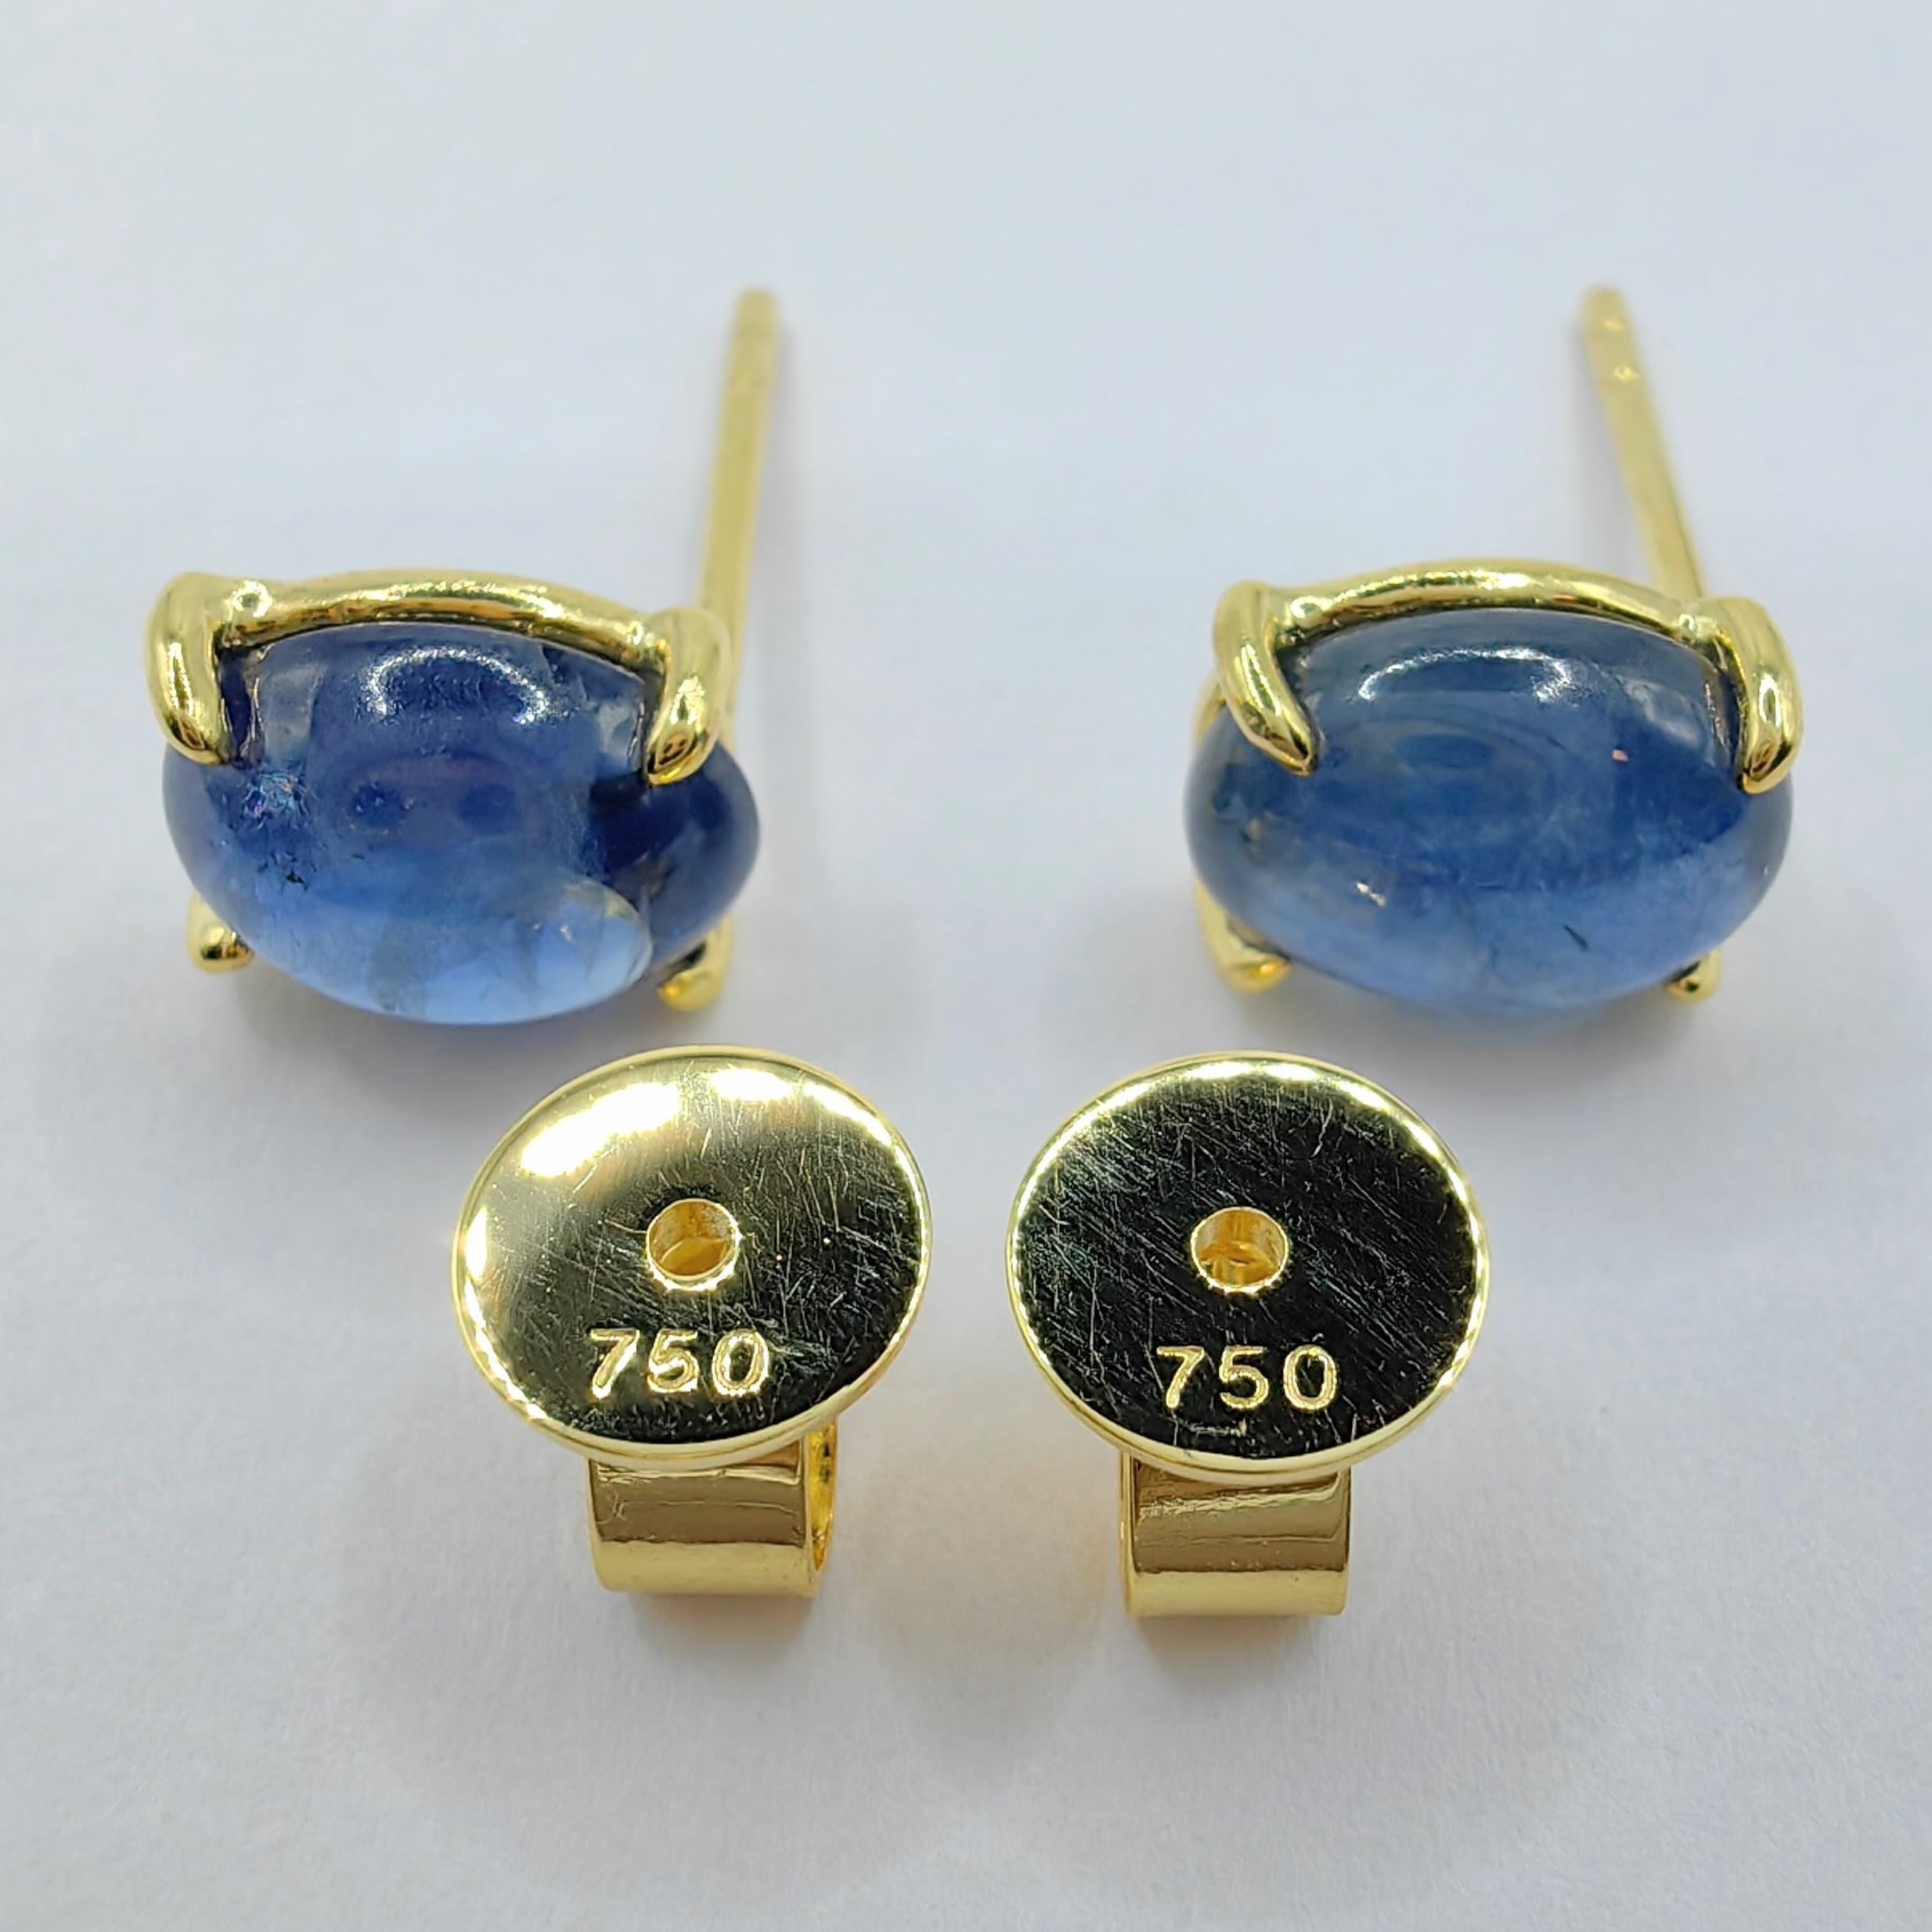 Matched 3.86 Carat 8x6mm Cabochon Blue Sapphire 18K Yellow Gold Stud Earrings For Sale 2